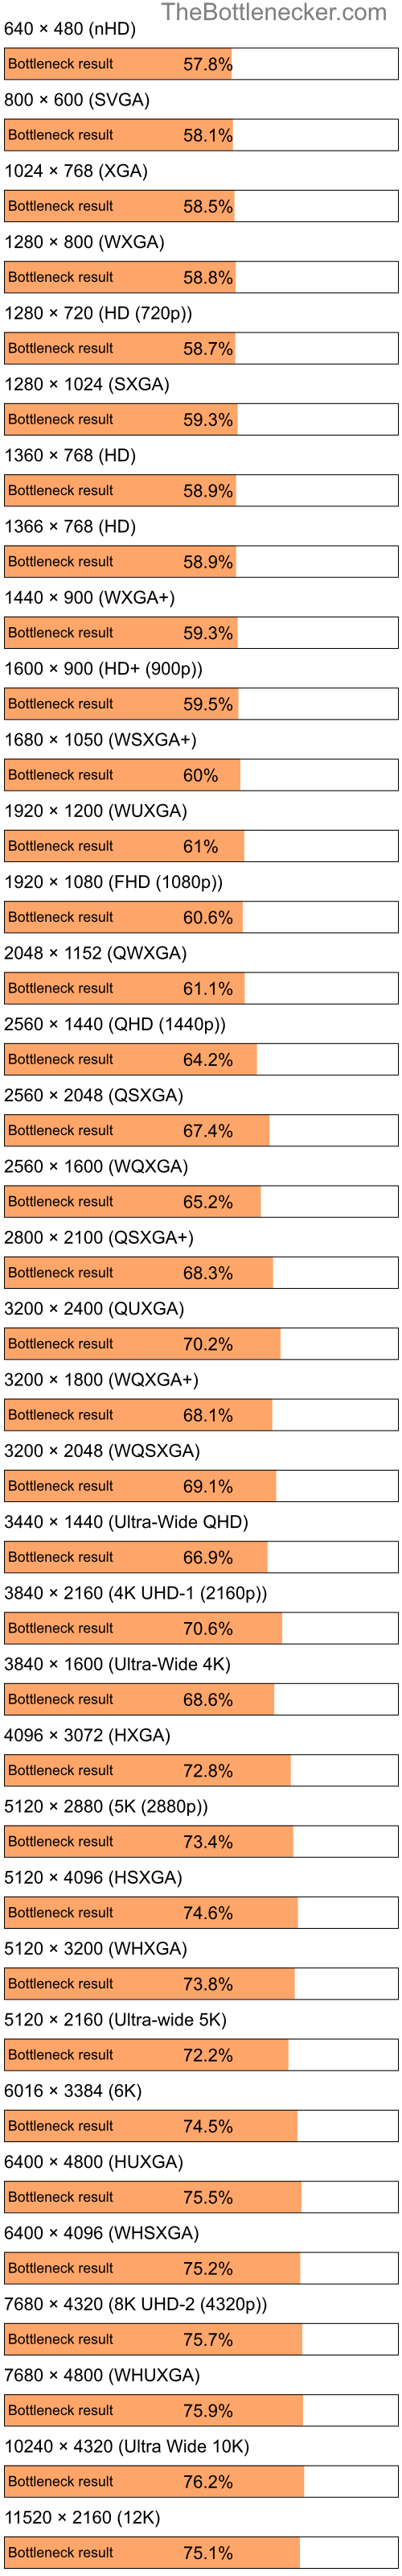 Bottleneck results by resolution for Intel Celeron M and AMD M860G with Mobility Radeon 4100 in Processor Intense Tasks